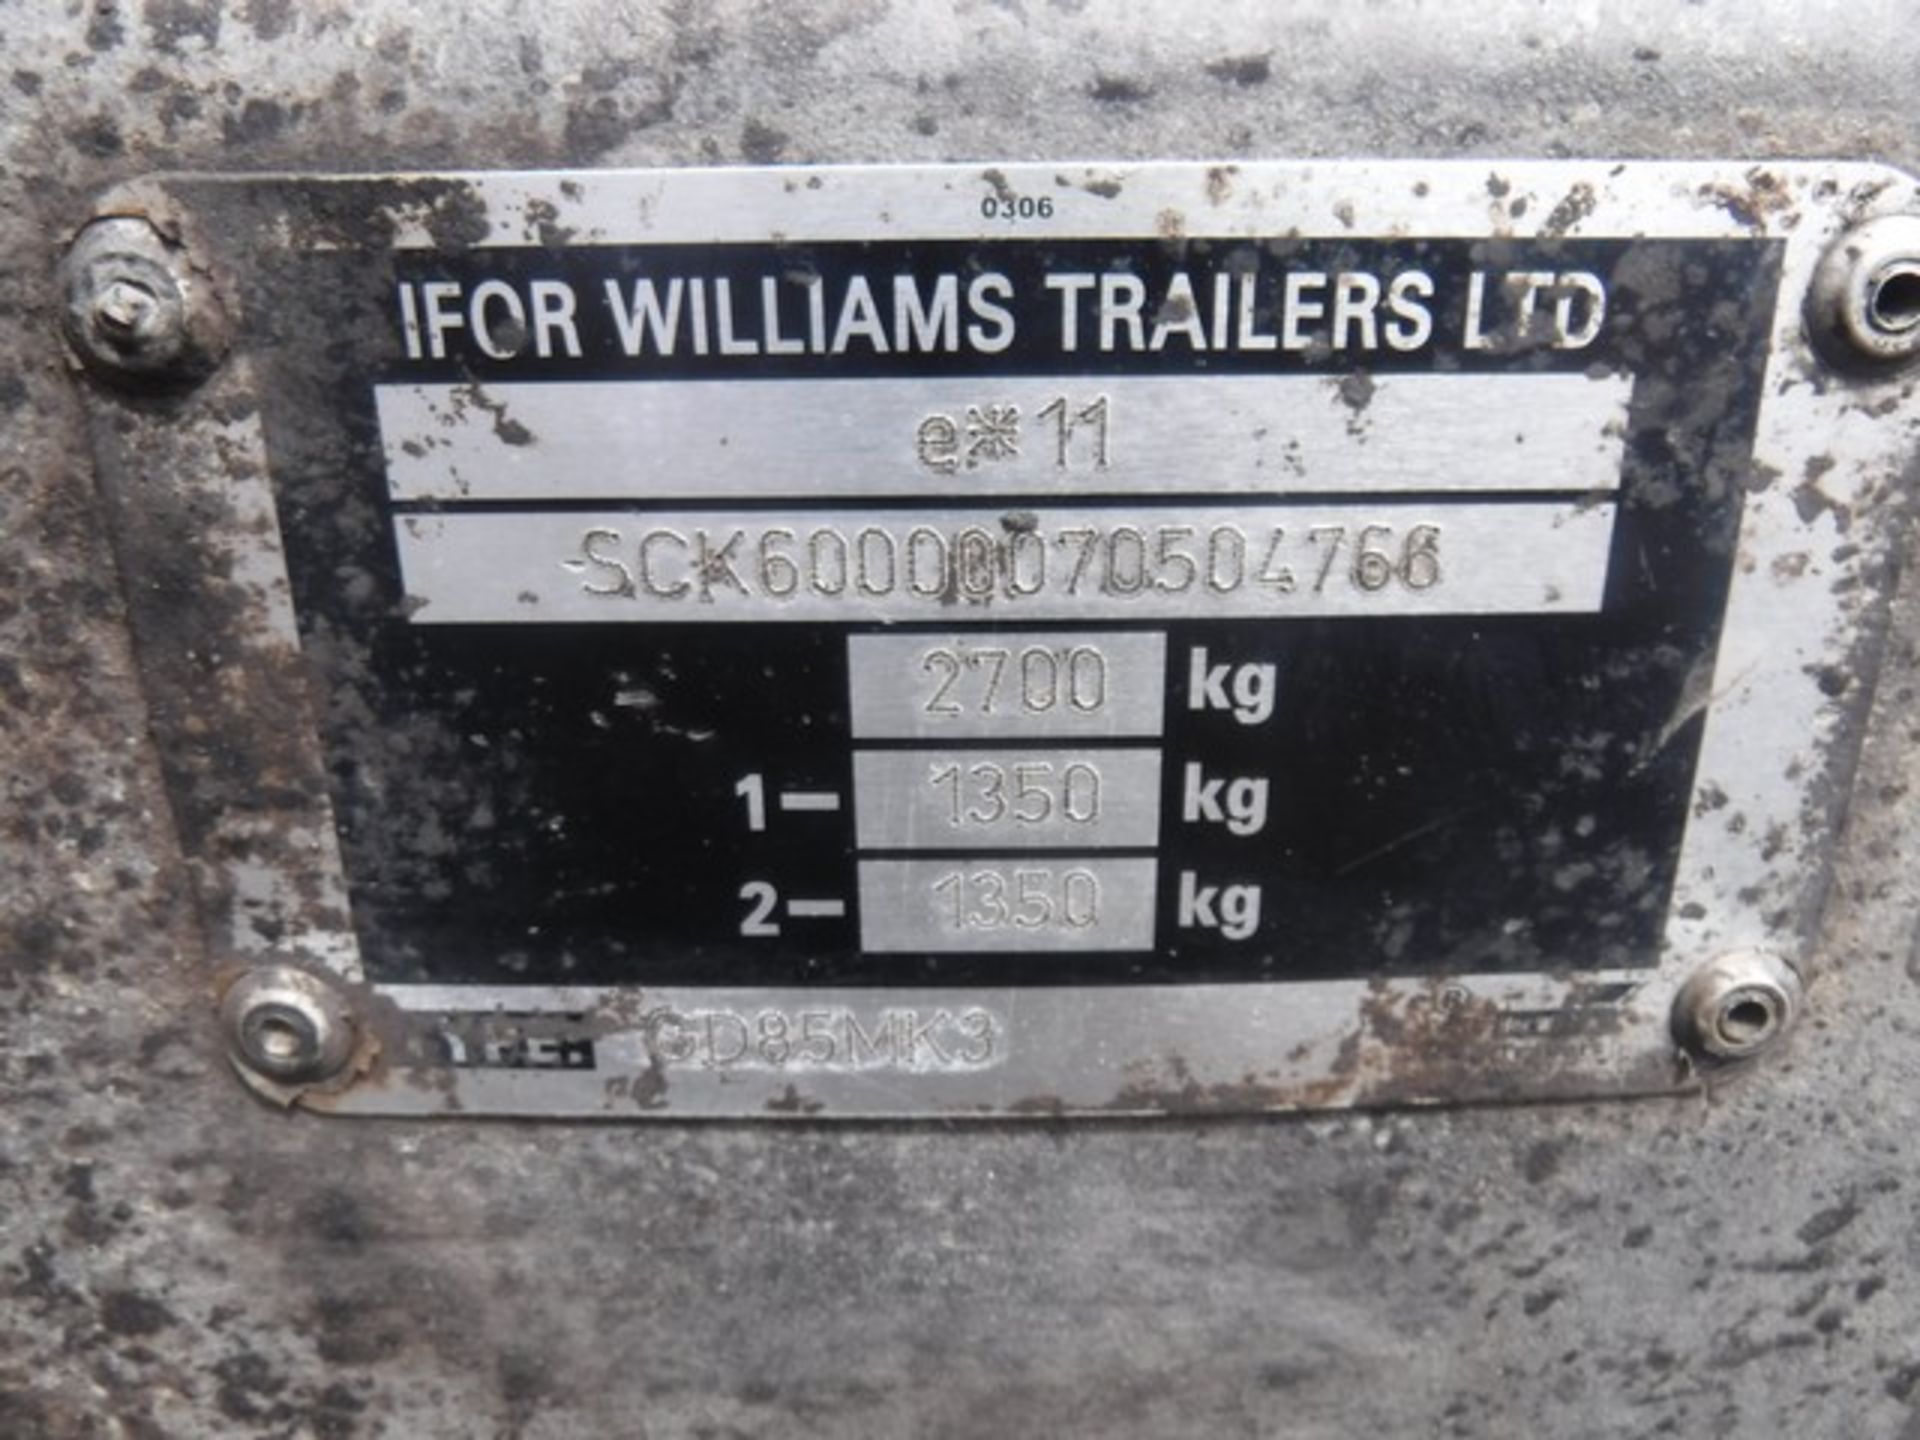 IFOR WILLIAMS 10X5 TWIN AXLE PLANT TRAILER GD85MK3 SN - 70504766 ASSET - DL1527 - Image 4 of 4